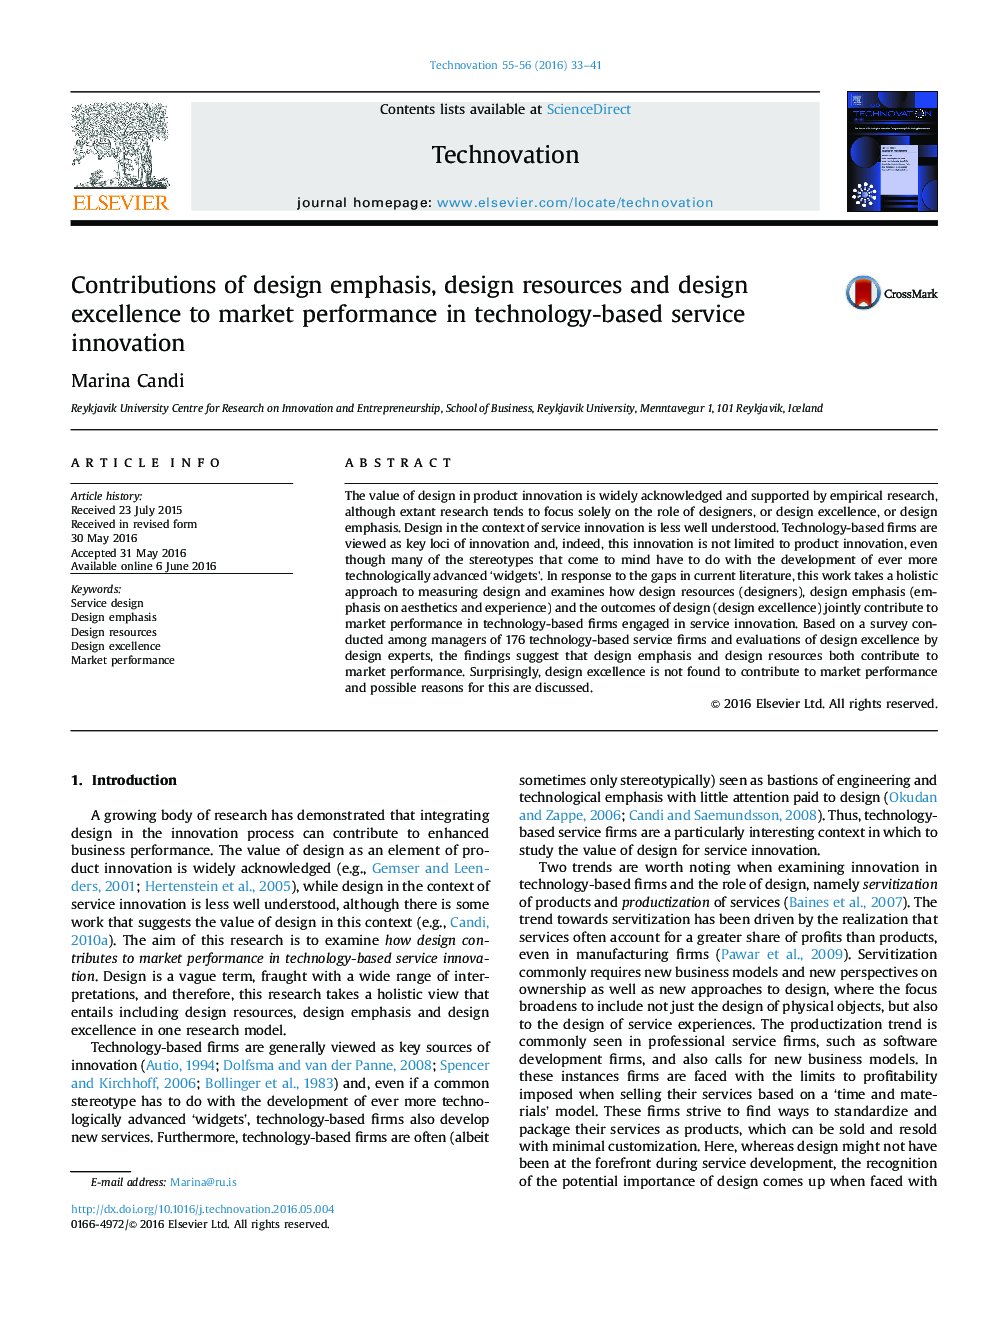 Contributions of design emphasis, design resources and design excellence to market performance in technology-based service innovation